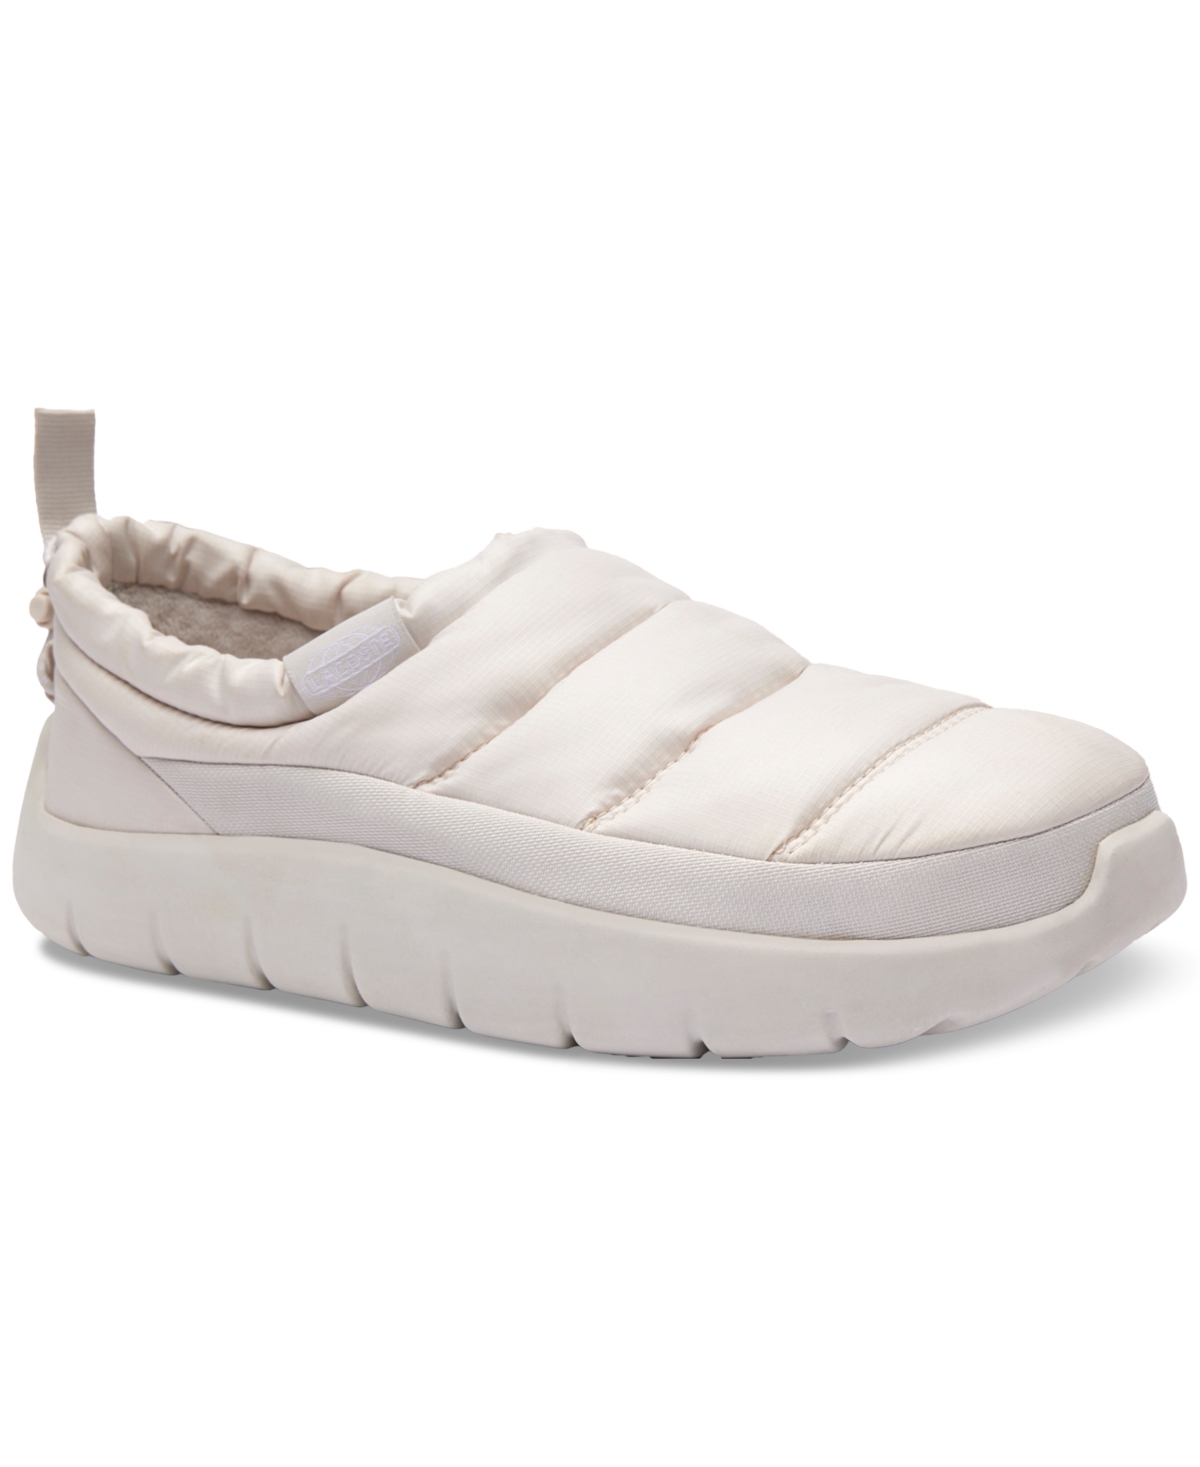 Lacoste Men's Serve Puffer Slippers In Off White,off White